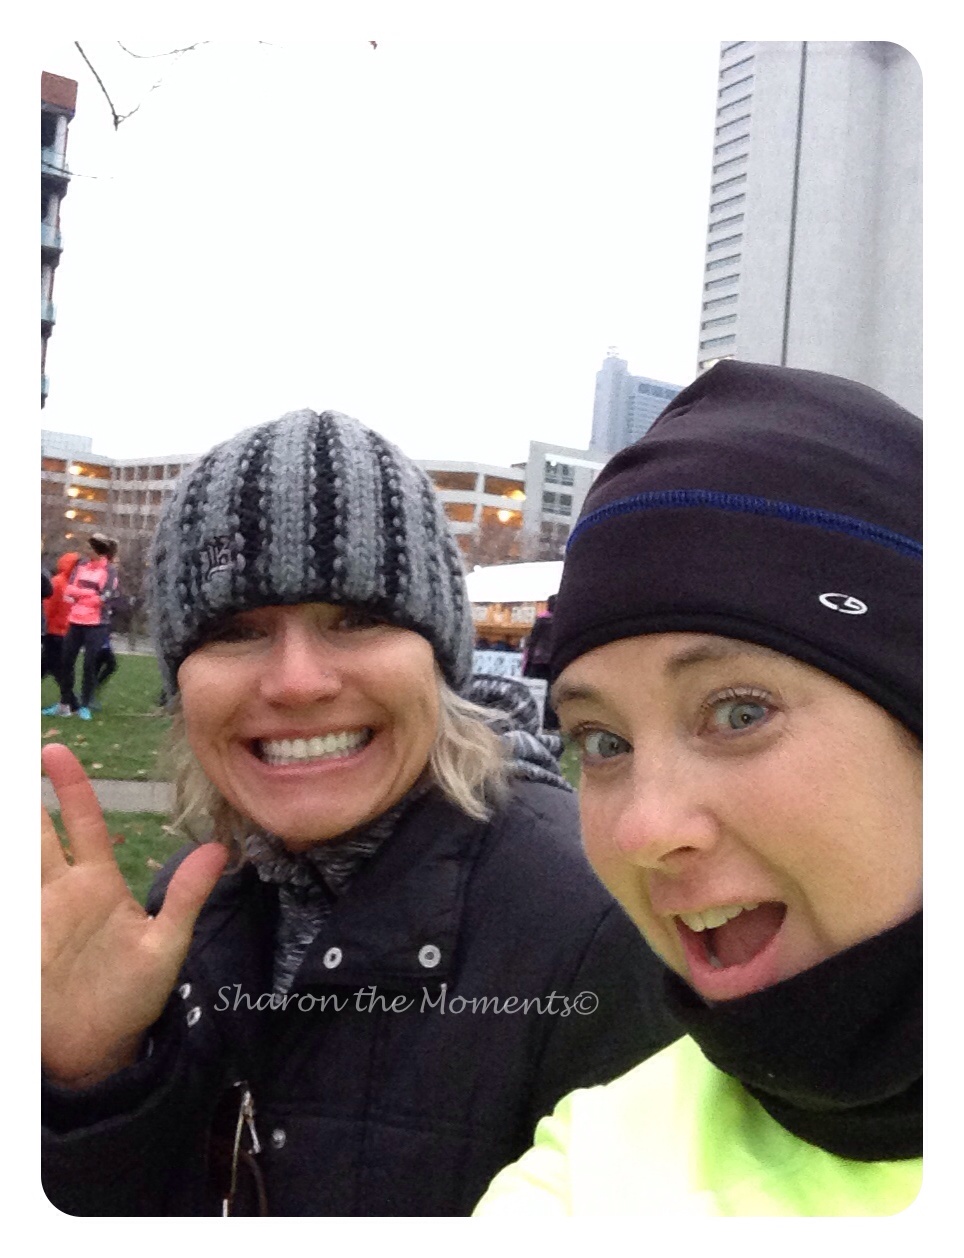 Running the Hot Chocolate 5K|Sharon the Moments Blog